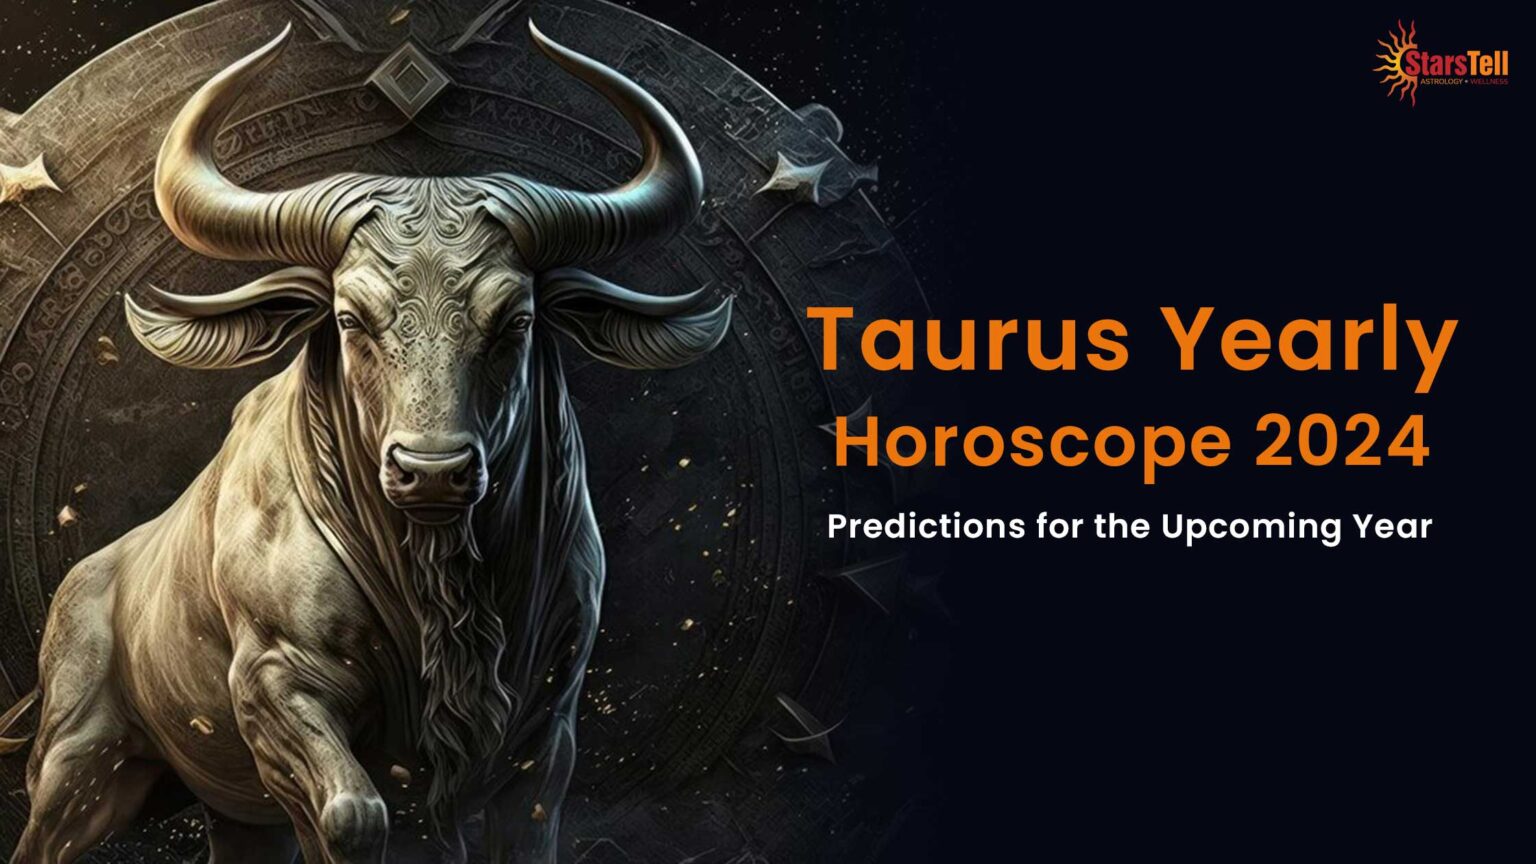 Taurus Yearly Horoscope 2024 Predictions for the Year